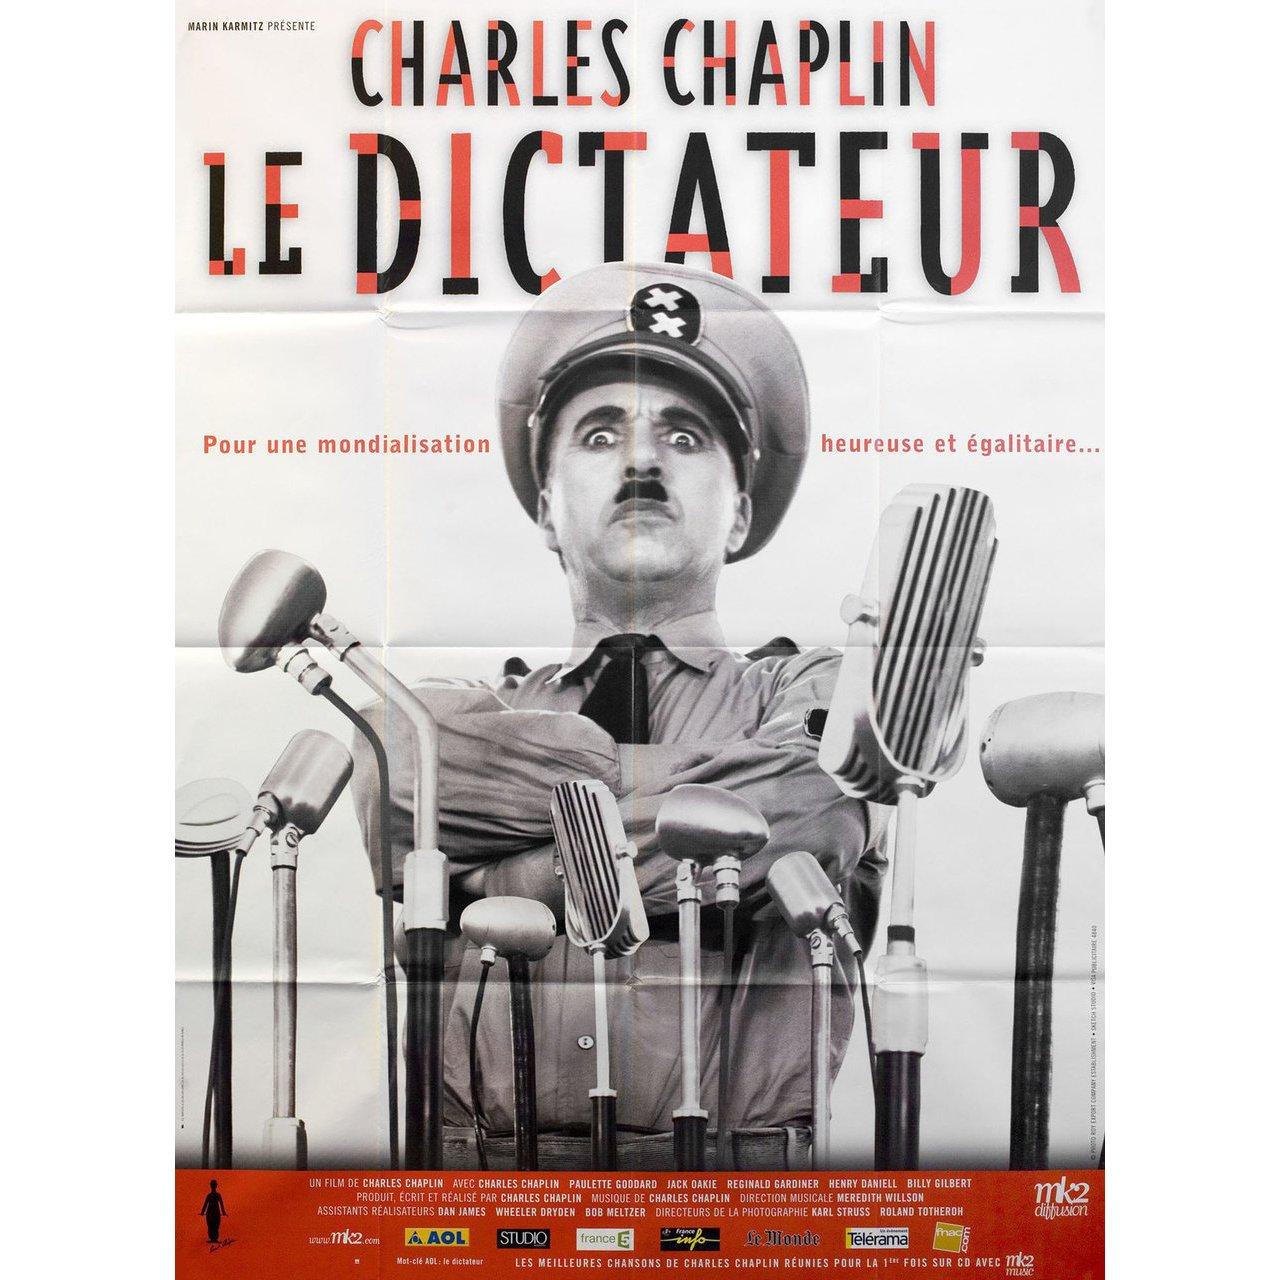 Original 2002 re-release French grande poster for the 1940 film 'The Great Dictator' directed by Charles Chaplin with Charles Chaplin / Jack Oakie / Reginald Gardiner / Henry Daniell. Fine condition, folded. Many original posters were issued folded